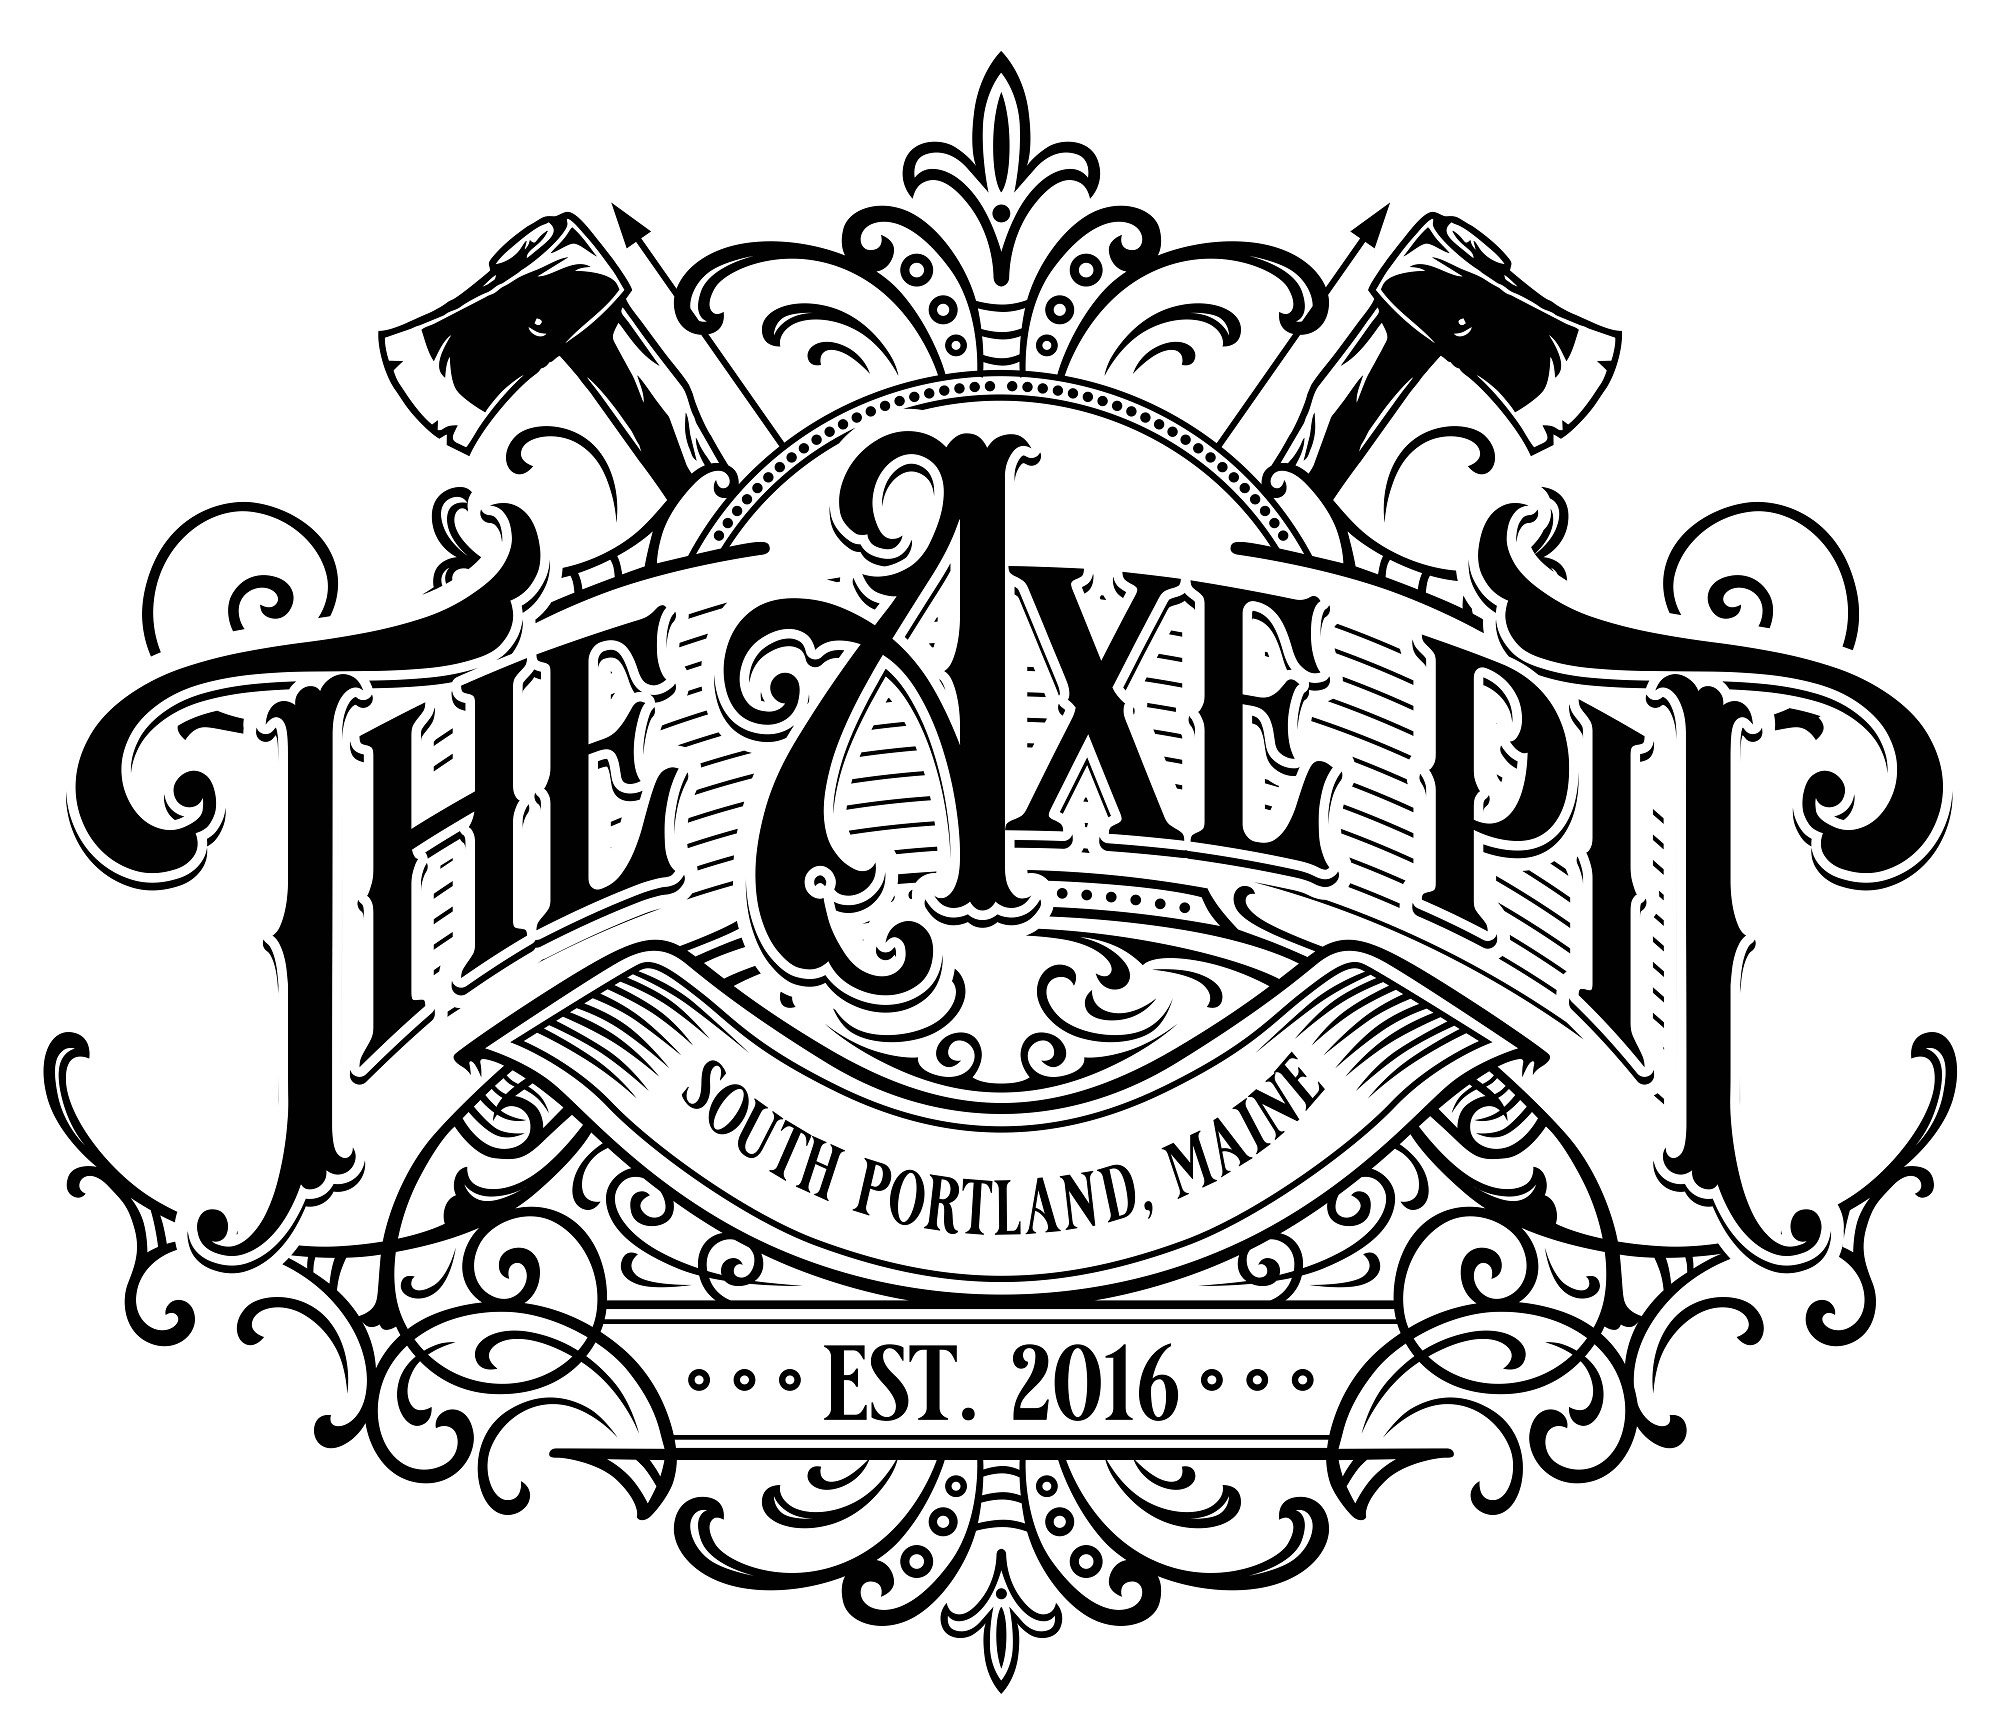 The Axe Pit